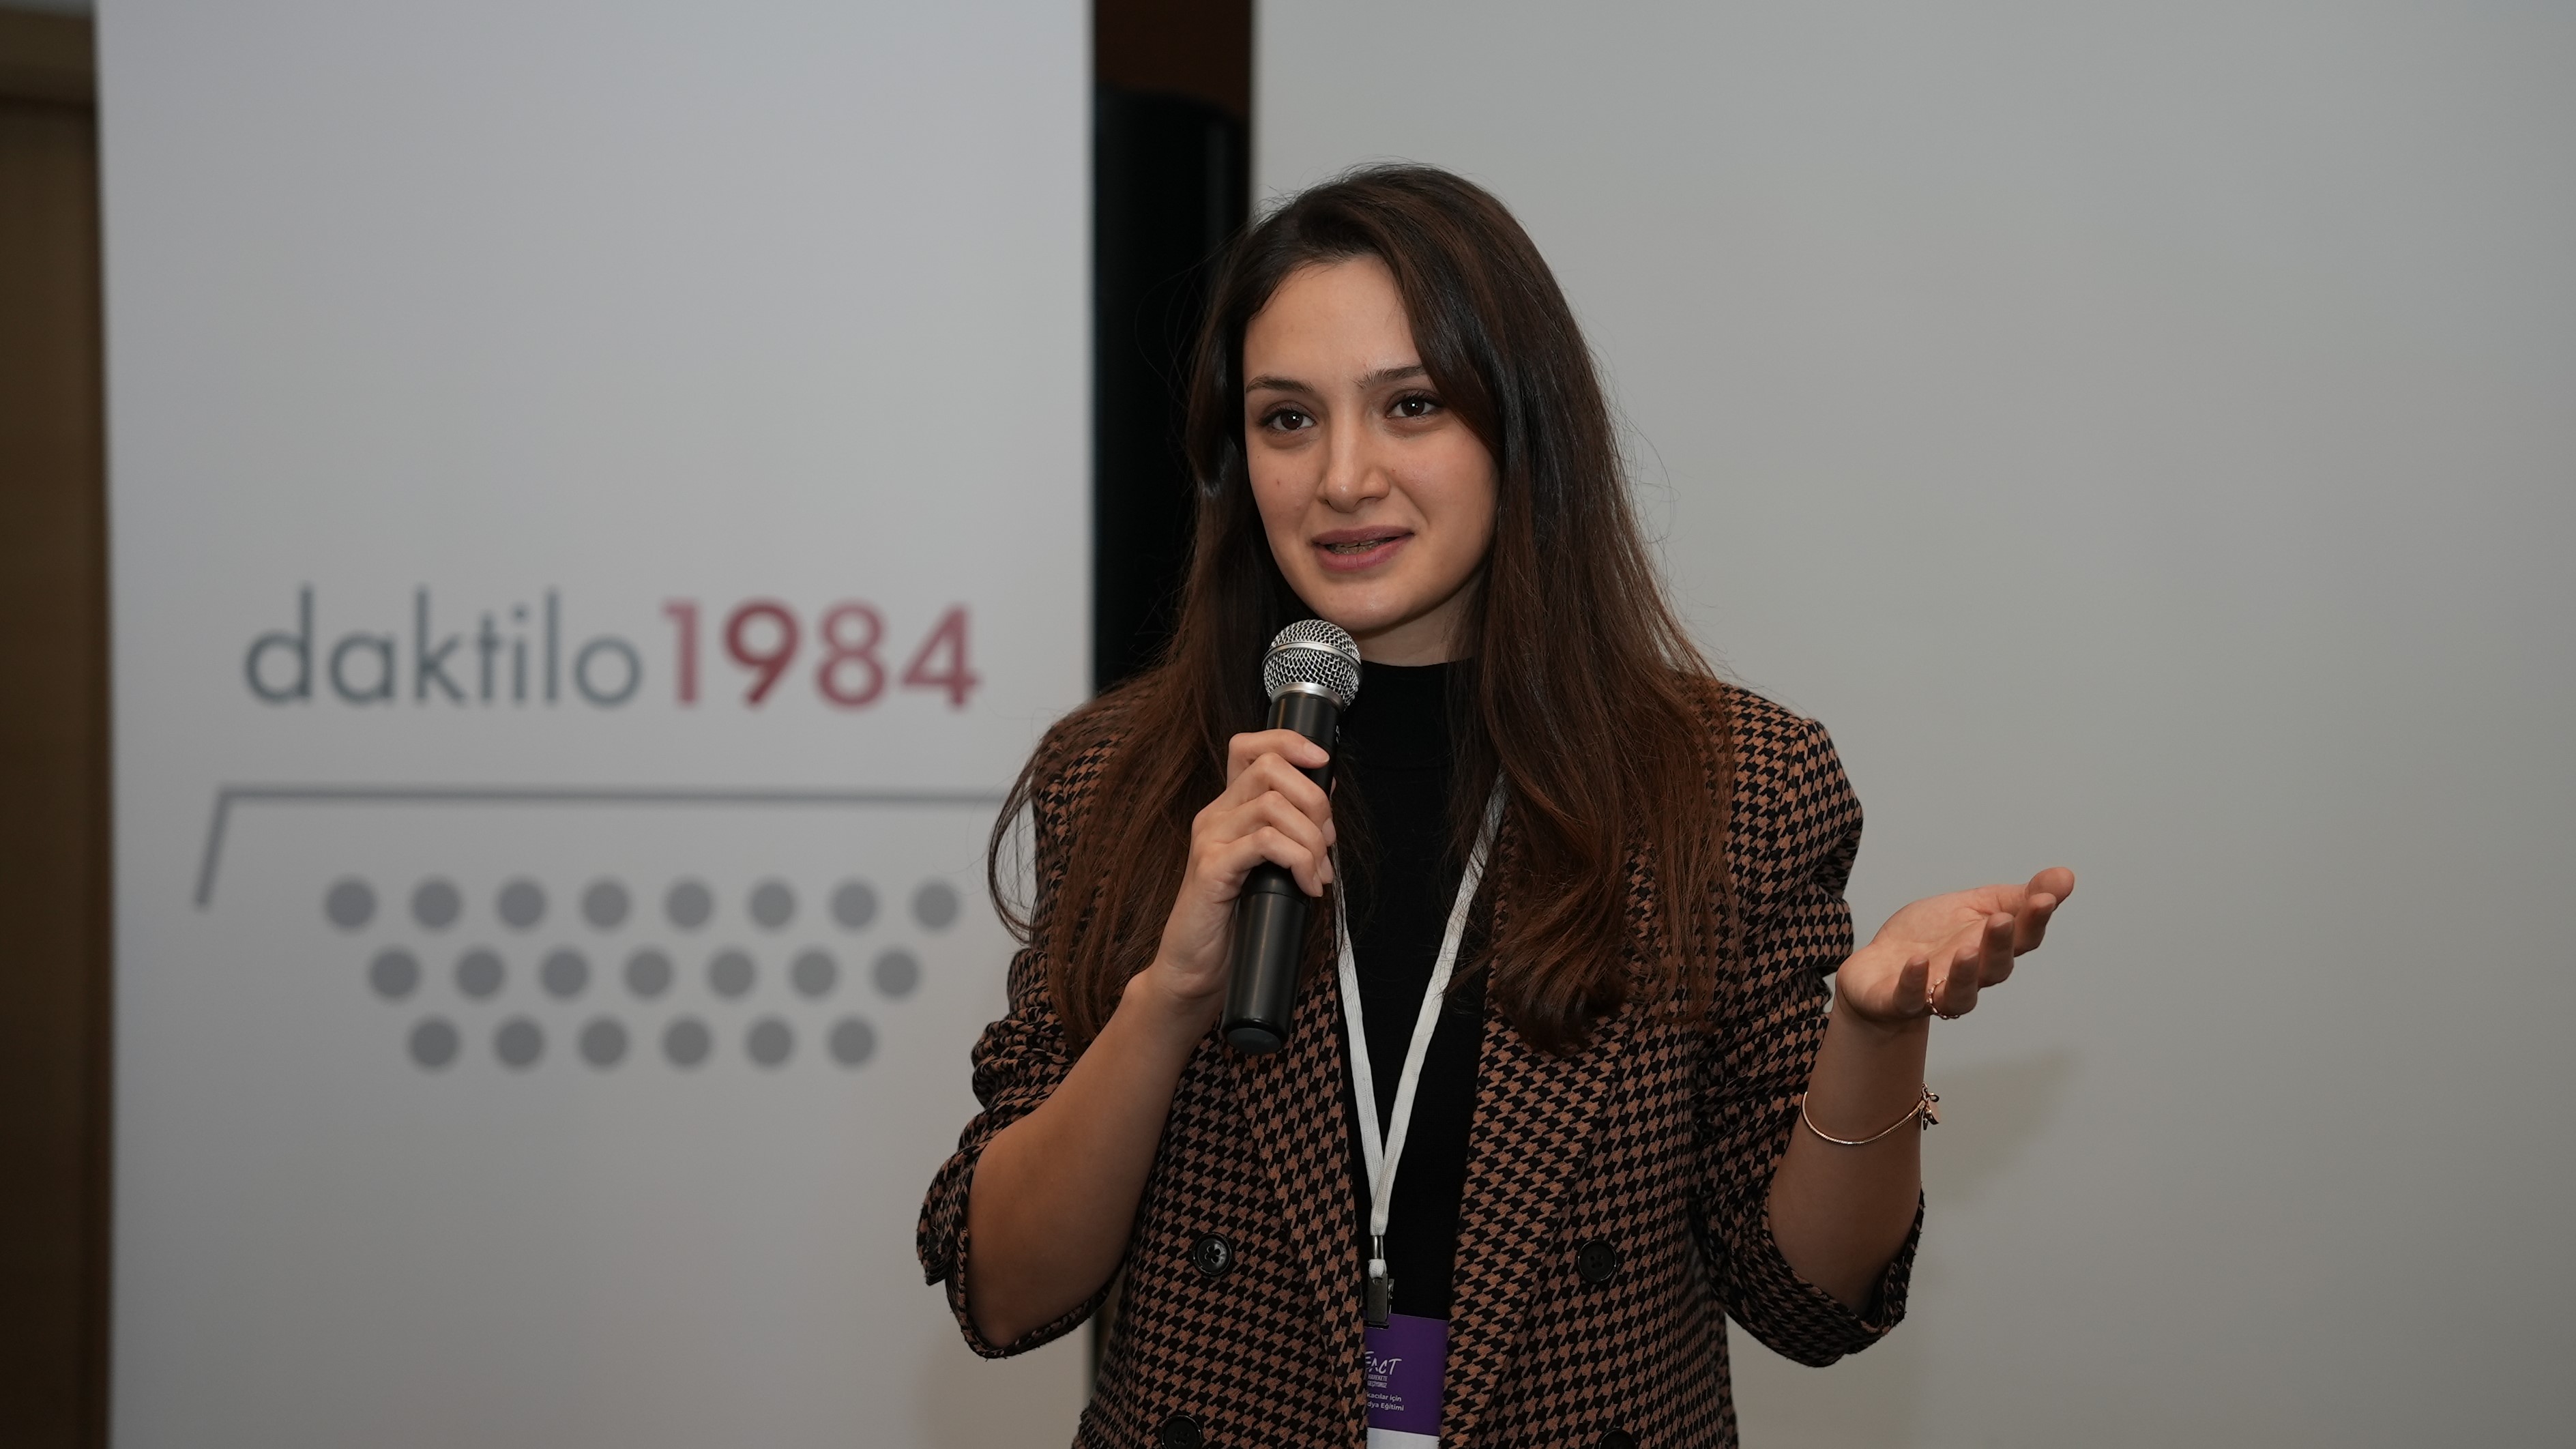 Public speaking coach Elif Menderes addresses participants at a We Act event organised to encourage Turkish women to enter politics